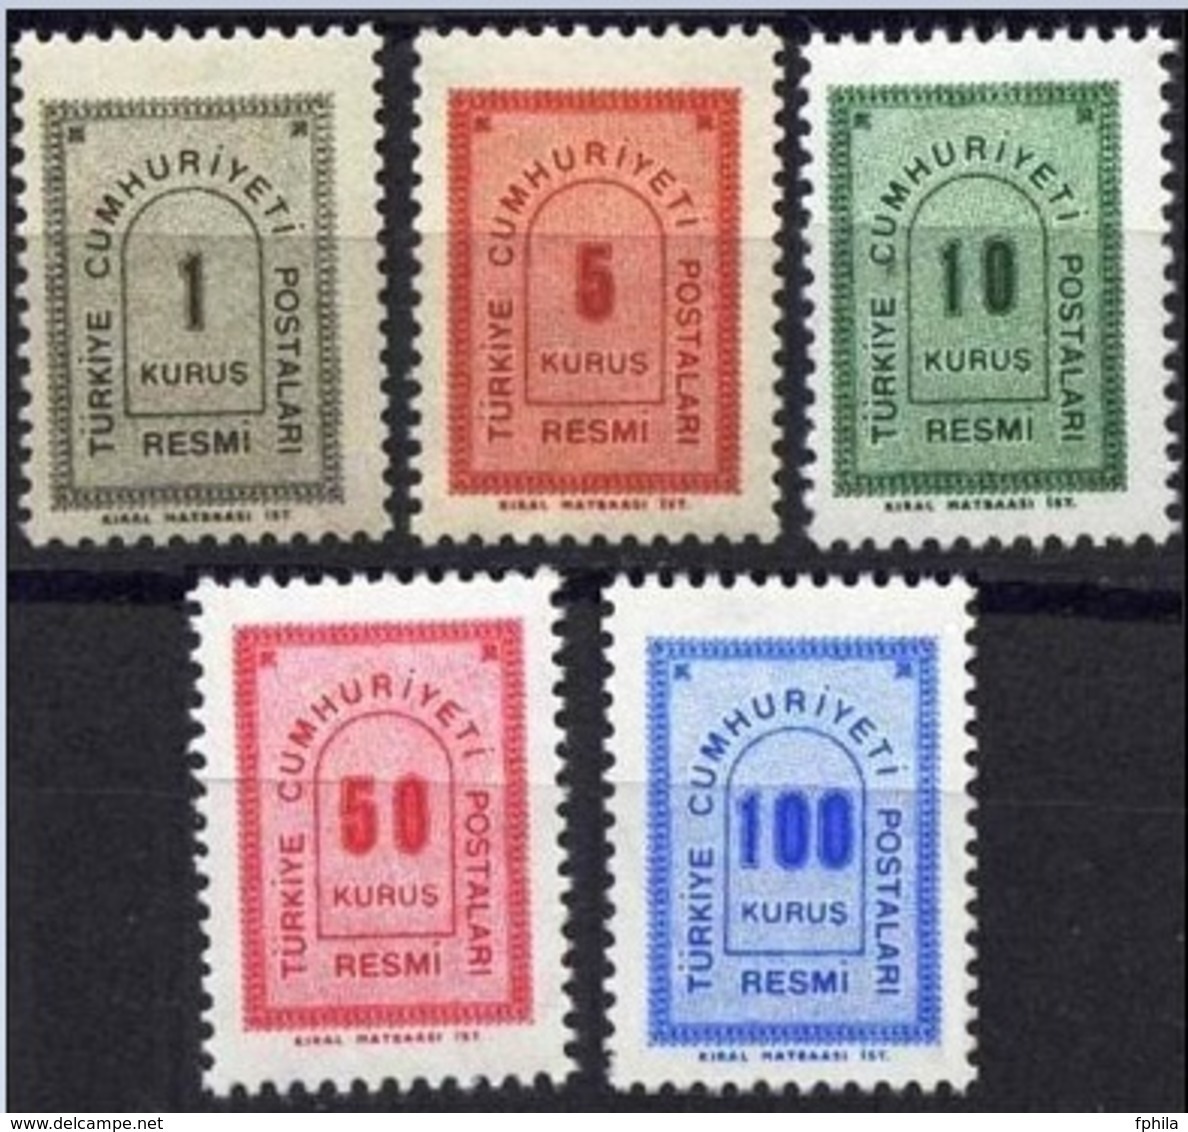 1963 TURKEY OFFICIAL STAMPS MNH ** - Timbres De Service